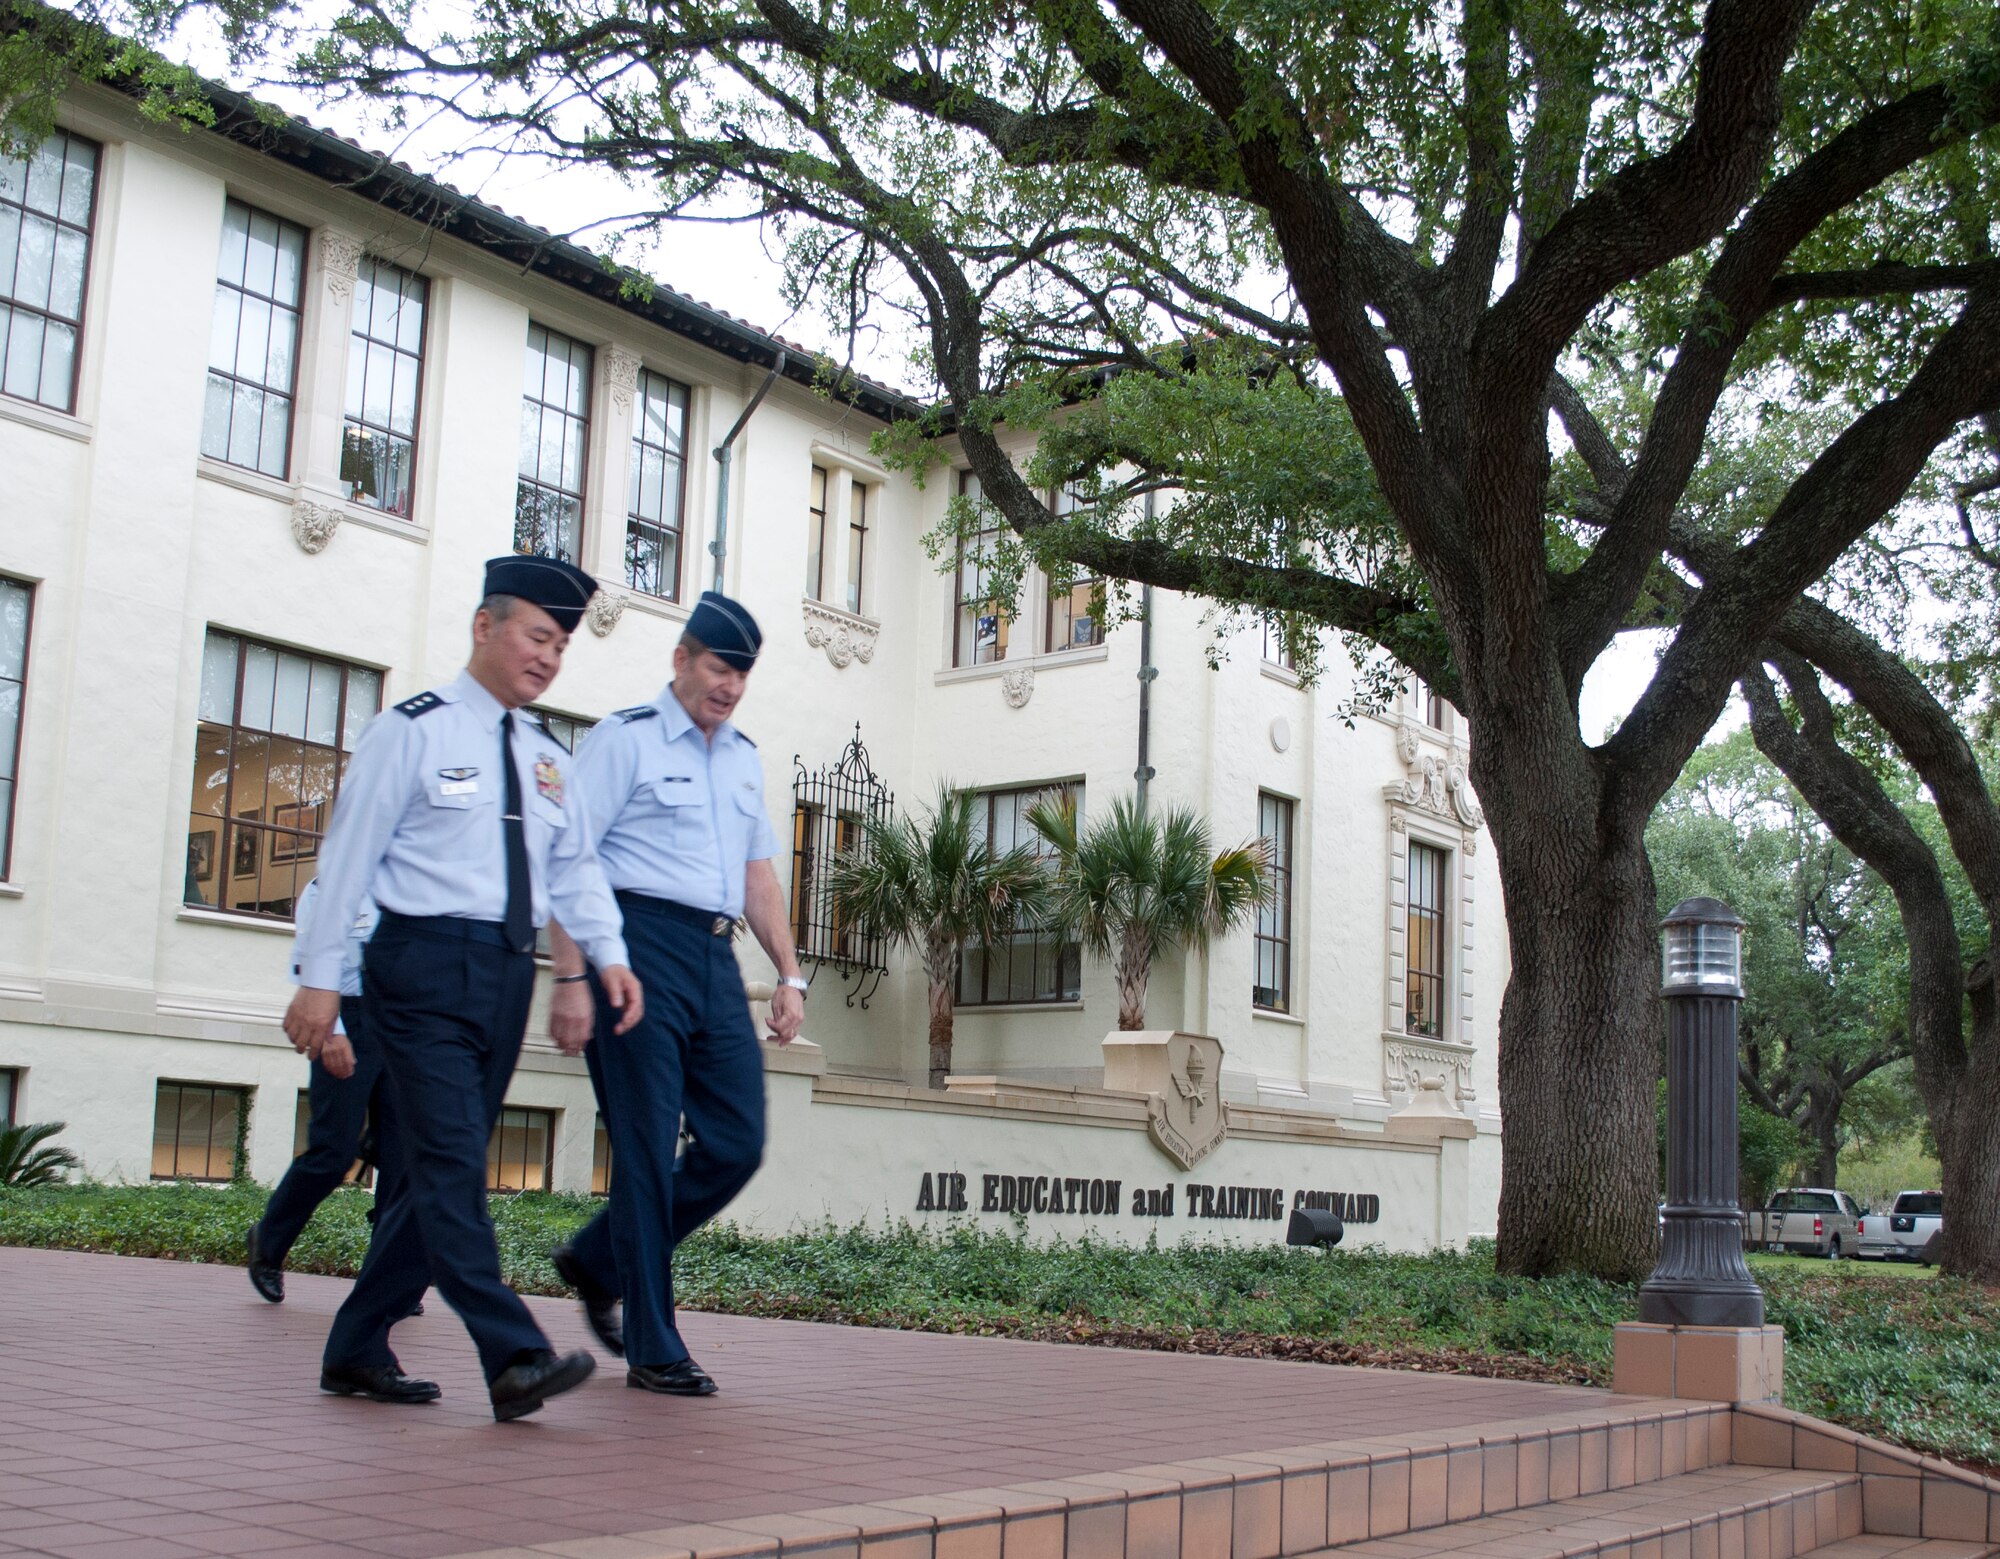 Gen. Robin Rand, commander of Air Education and Training Command, walks with Lt. Gen. Masayuki Hironaka, commander of the Air Training Command for the Japanese Air Self-Defense Force, Japan.  Hironaka visited units throughout Air Training and Education Command May 12, 2014. (U.S. Air Force photo by Capt. Ashley Walker)